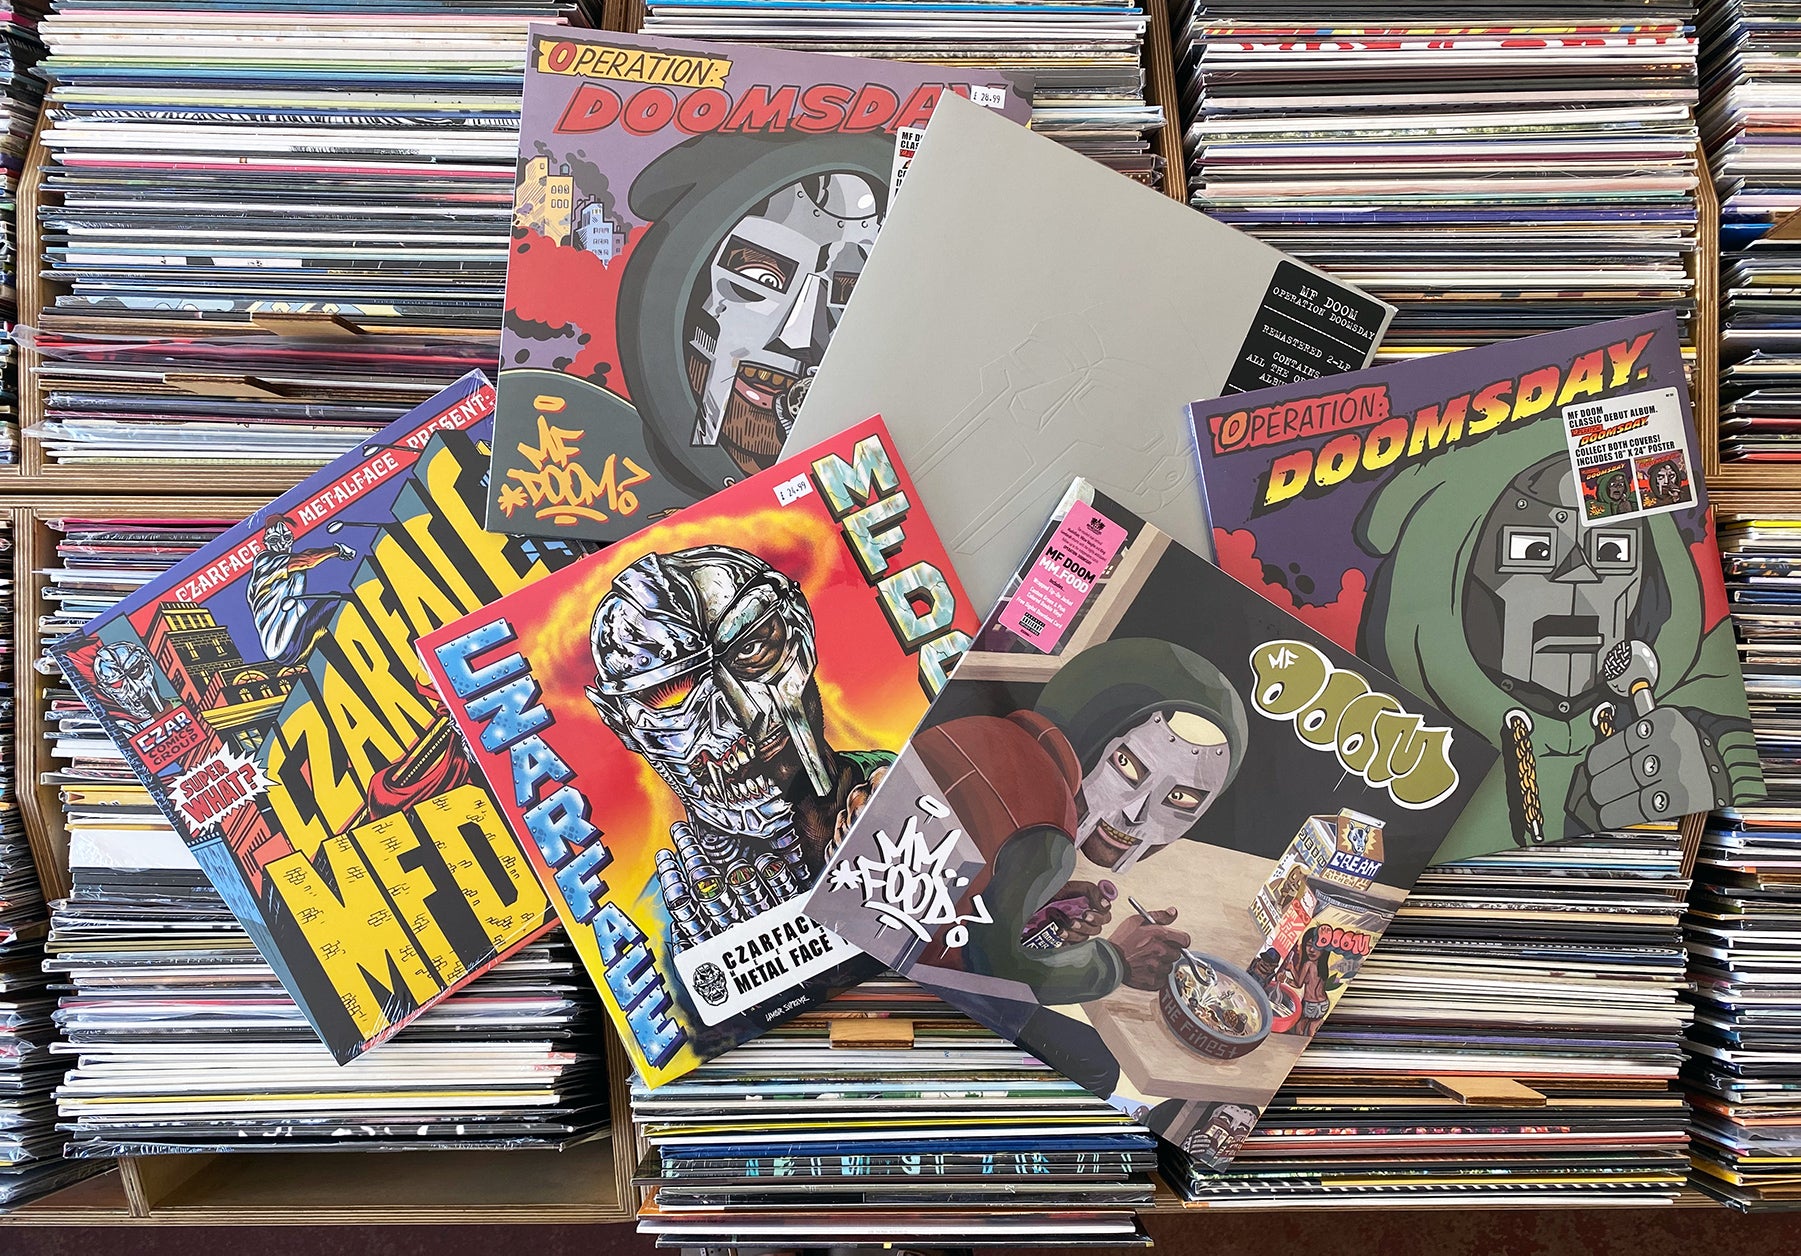 Not-new Records of the Week: MF DOOM, Hailu Mergia, The Specials, Squarepusher, Cold Wave #1 and The Avalanches.